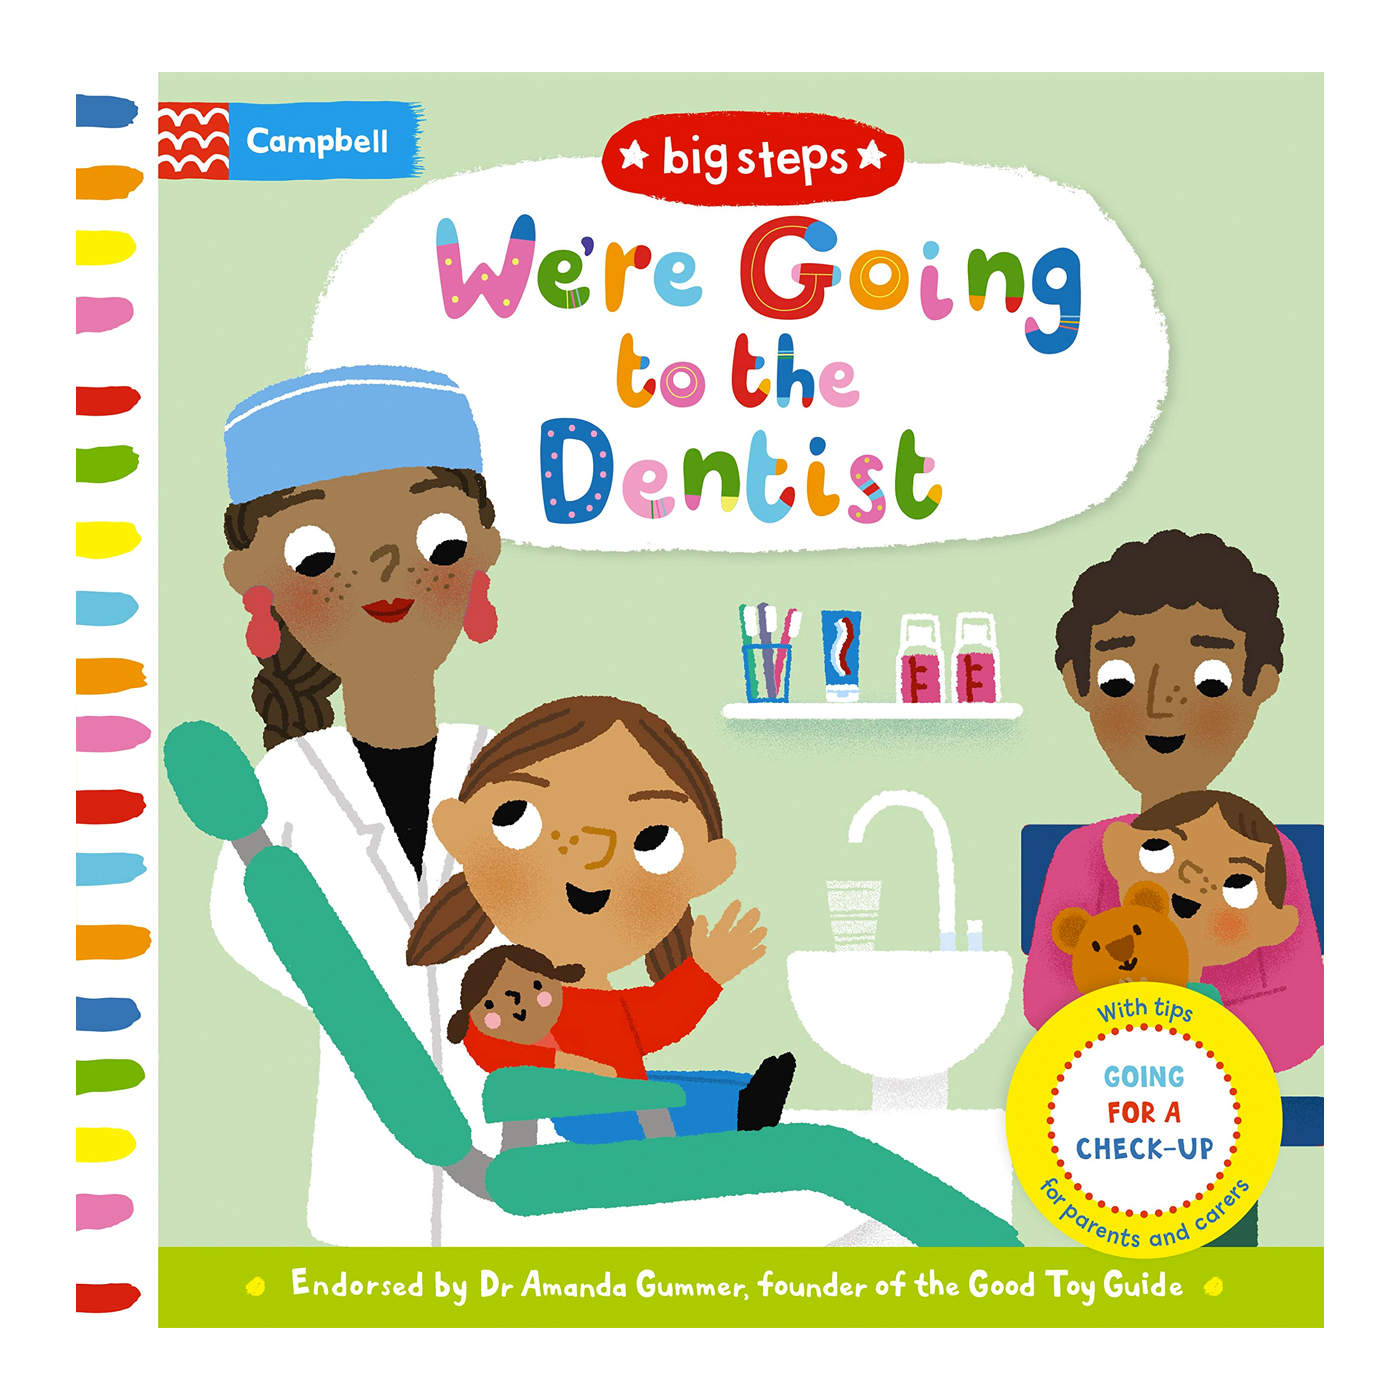  We're Going to the Dentist: Going for a Check-up